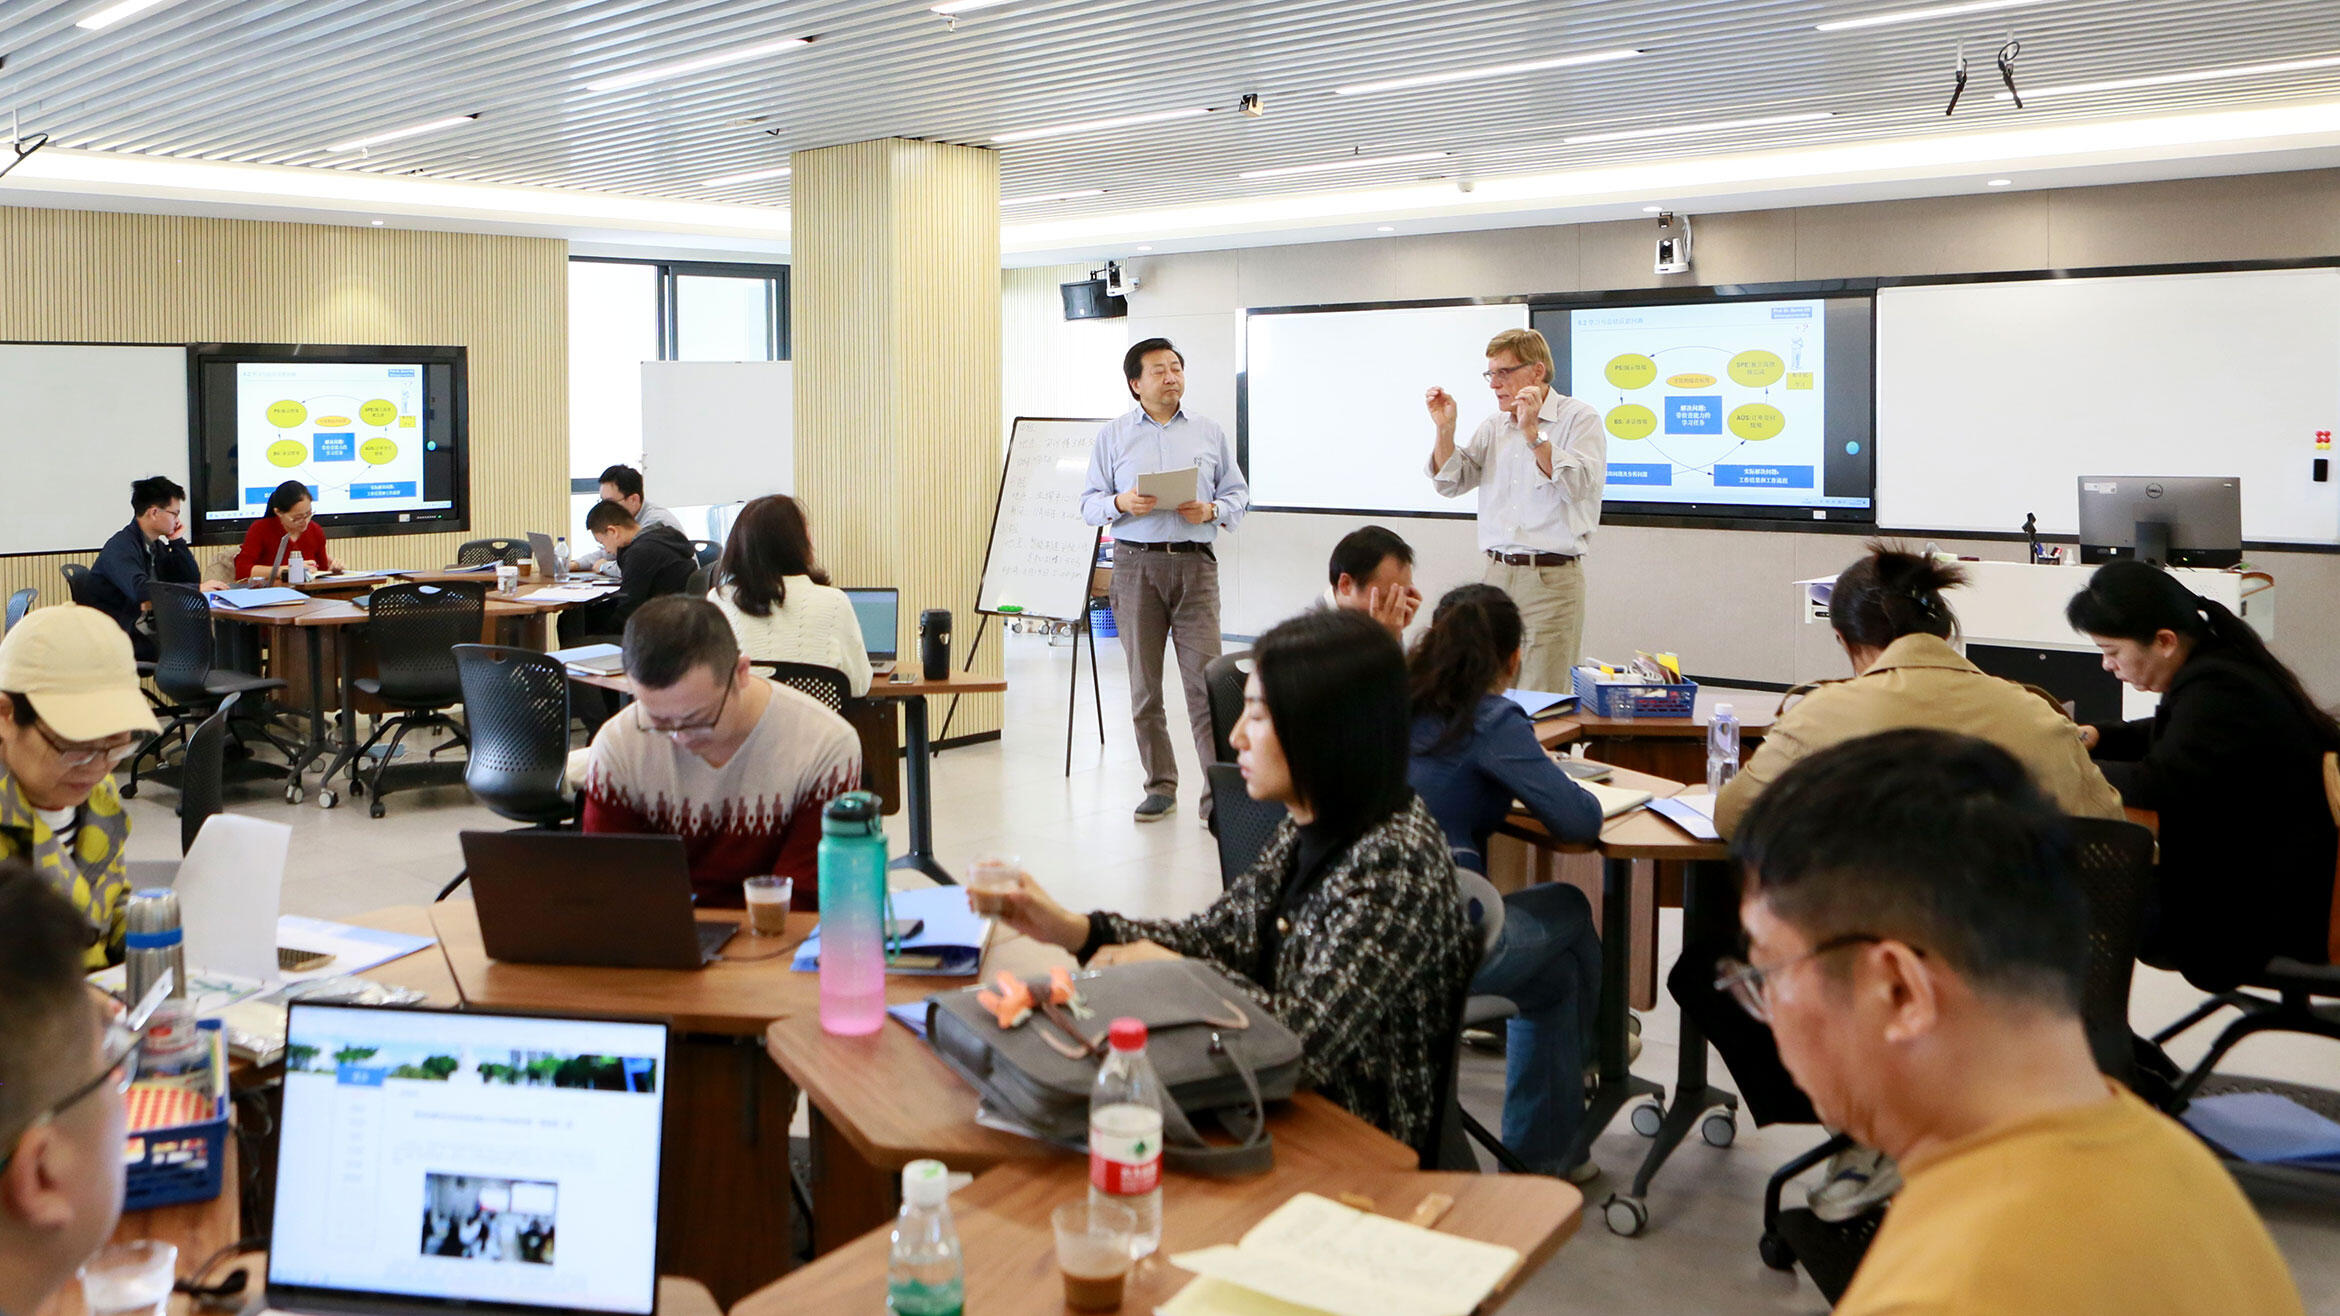 A glance into a teaching room showing Chinese people sitting in groups